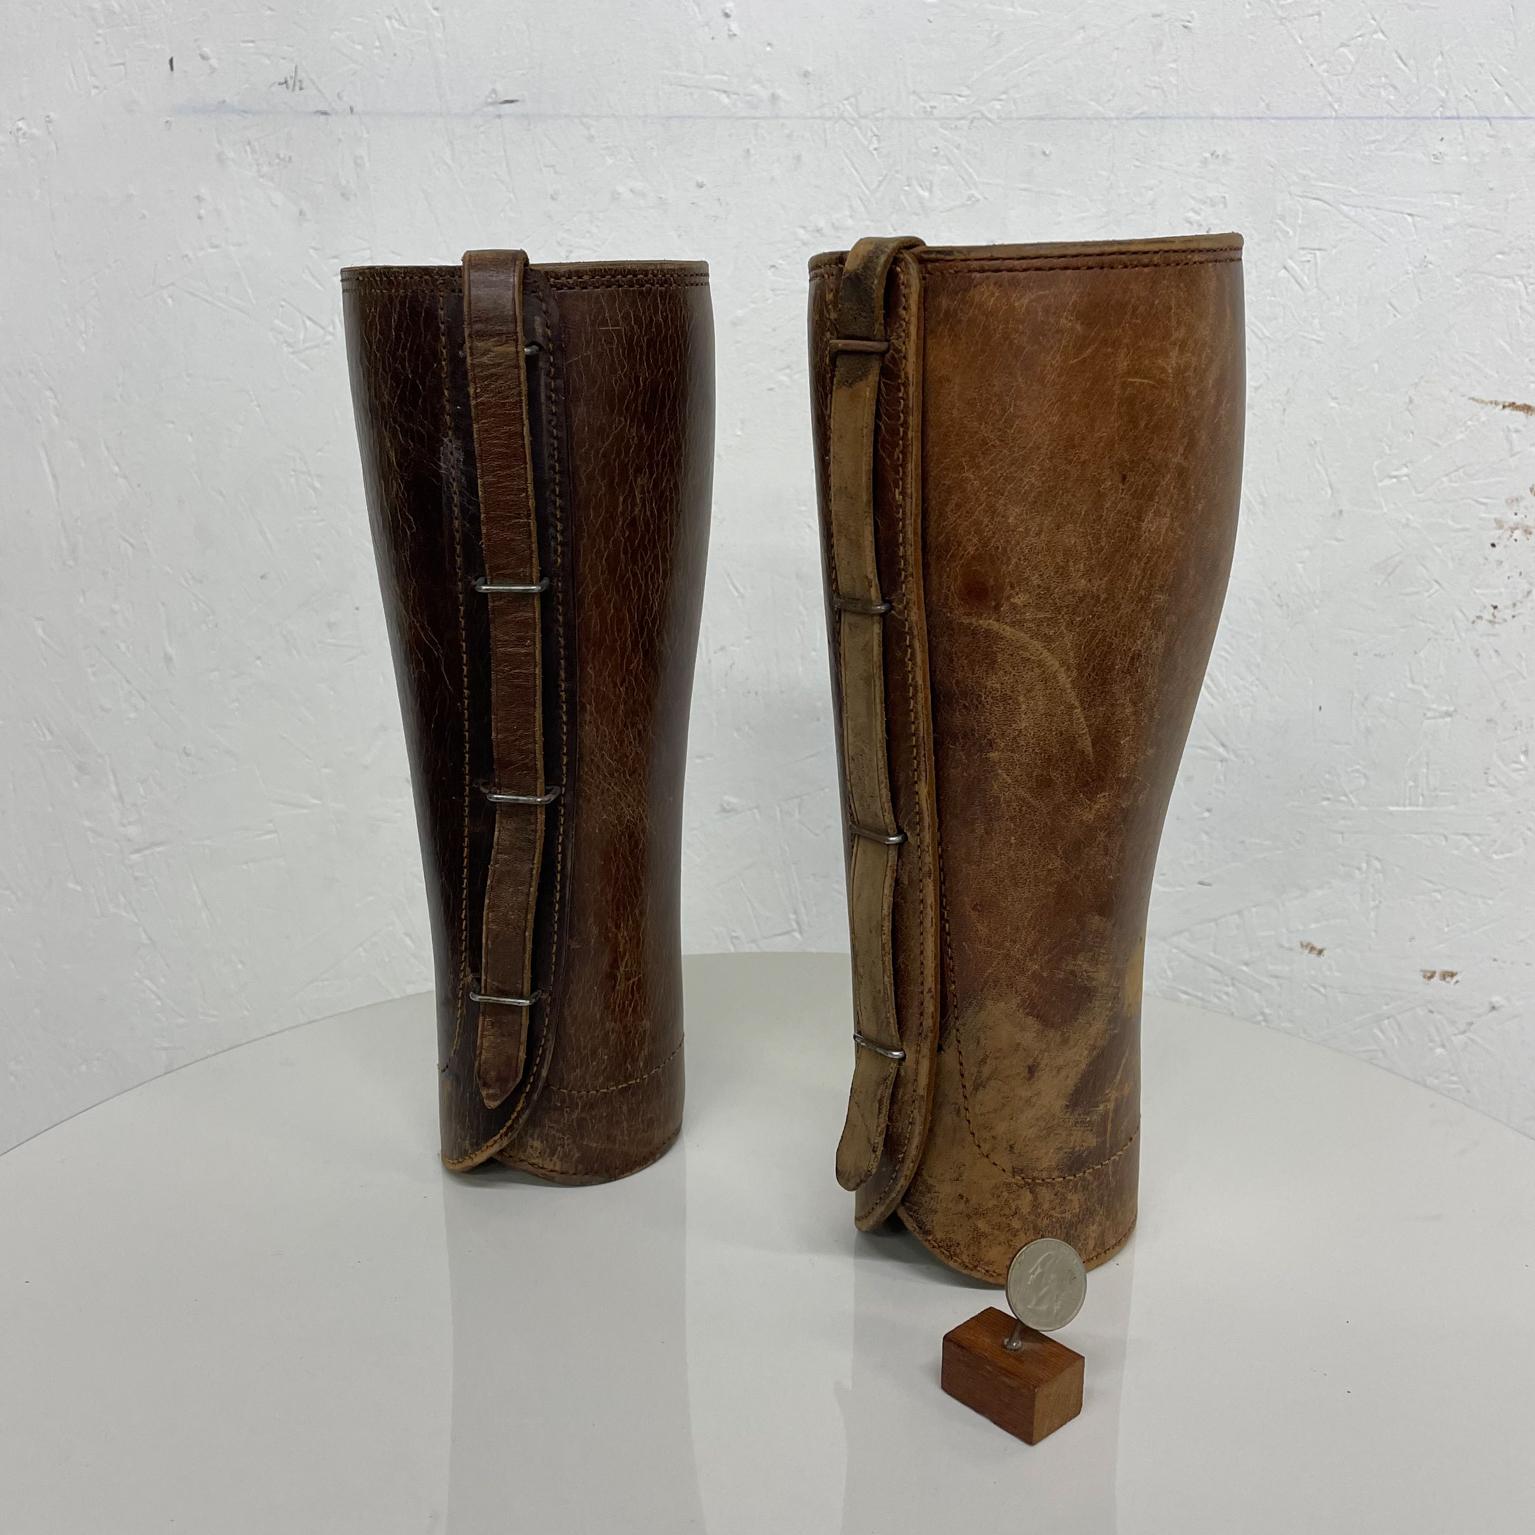 Leather calf protectors
Good looking cavalry vintage Leg protectors Half chaps Gaiter motorcycle puttees in vintage brown leather.
Marked Stamped 15
12.25 tall x 5.38 diameter
Original unrestored condition, quality stitching. Nice patina. Very